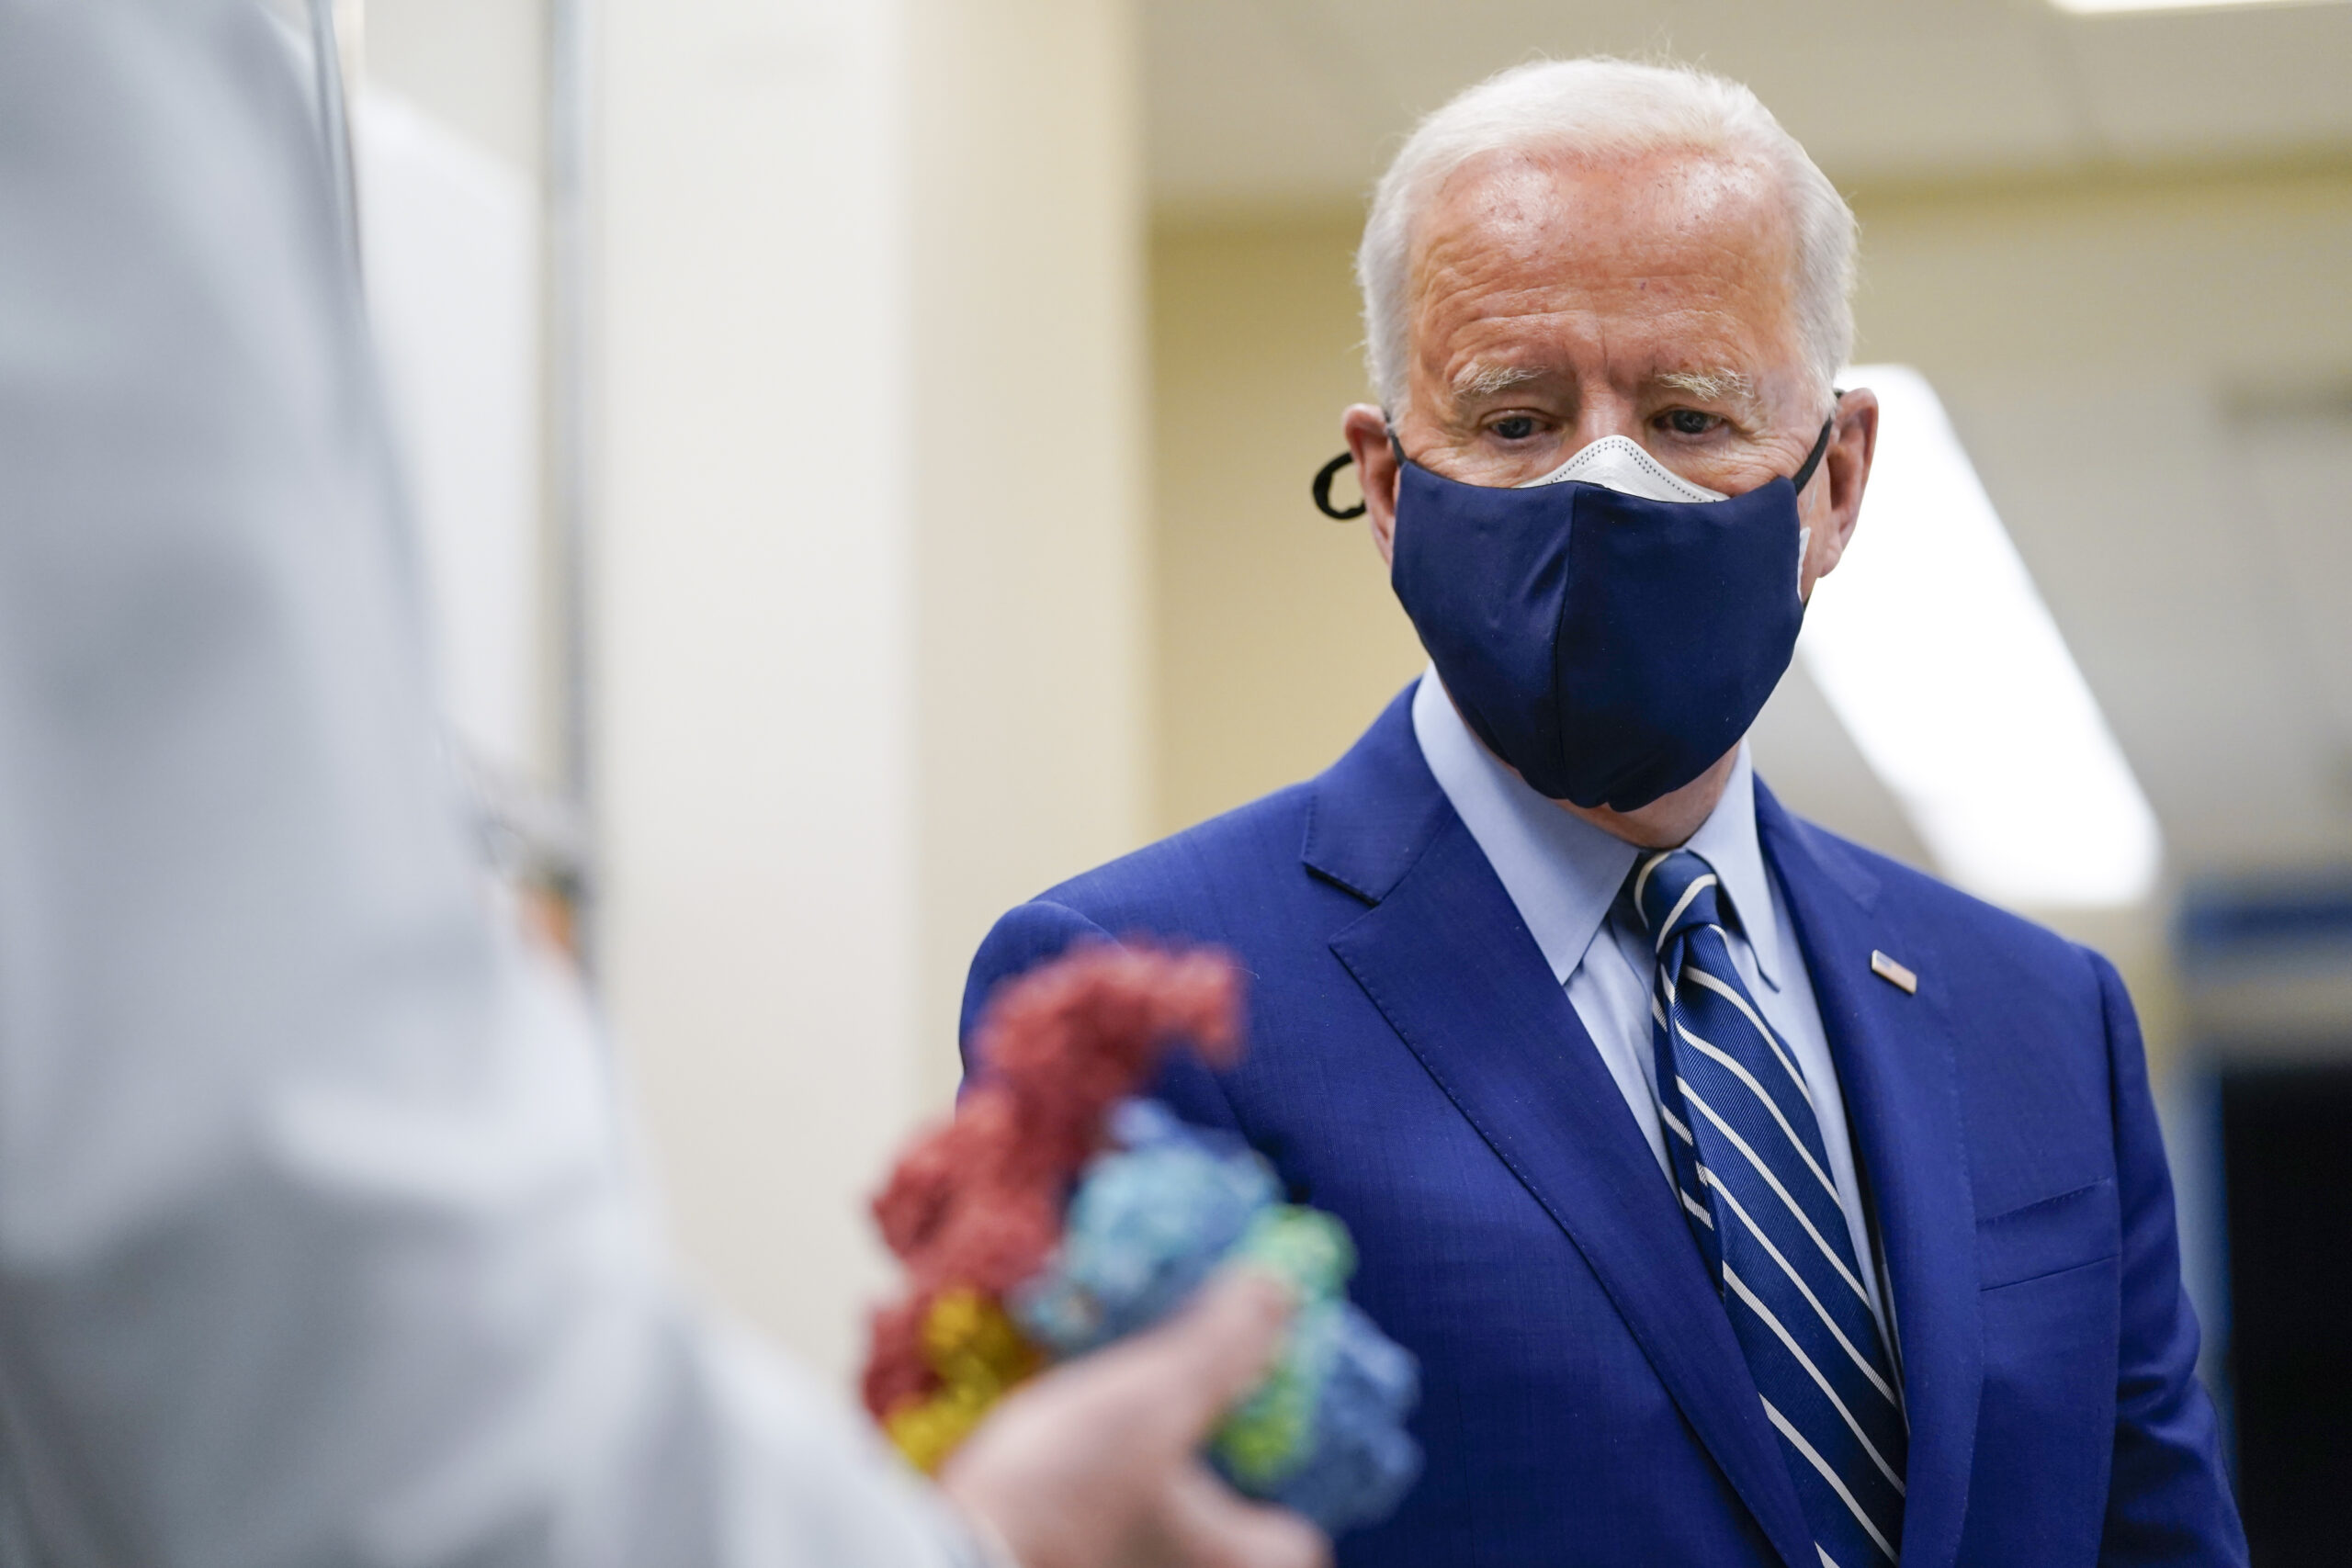 FILE - In this Feb. 11, 2021, file photo President Joe Biden looks at a model of Covid-19 as he visits the Viral Pathogenesis Laboratory at the National Institutes of Health in Bethesda, Md. (AP Photo/Evan Vucci, File)